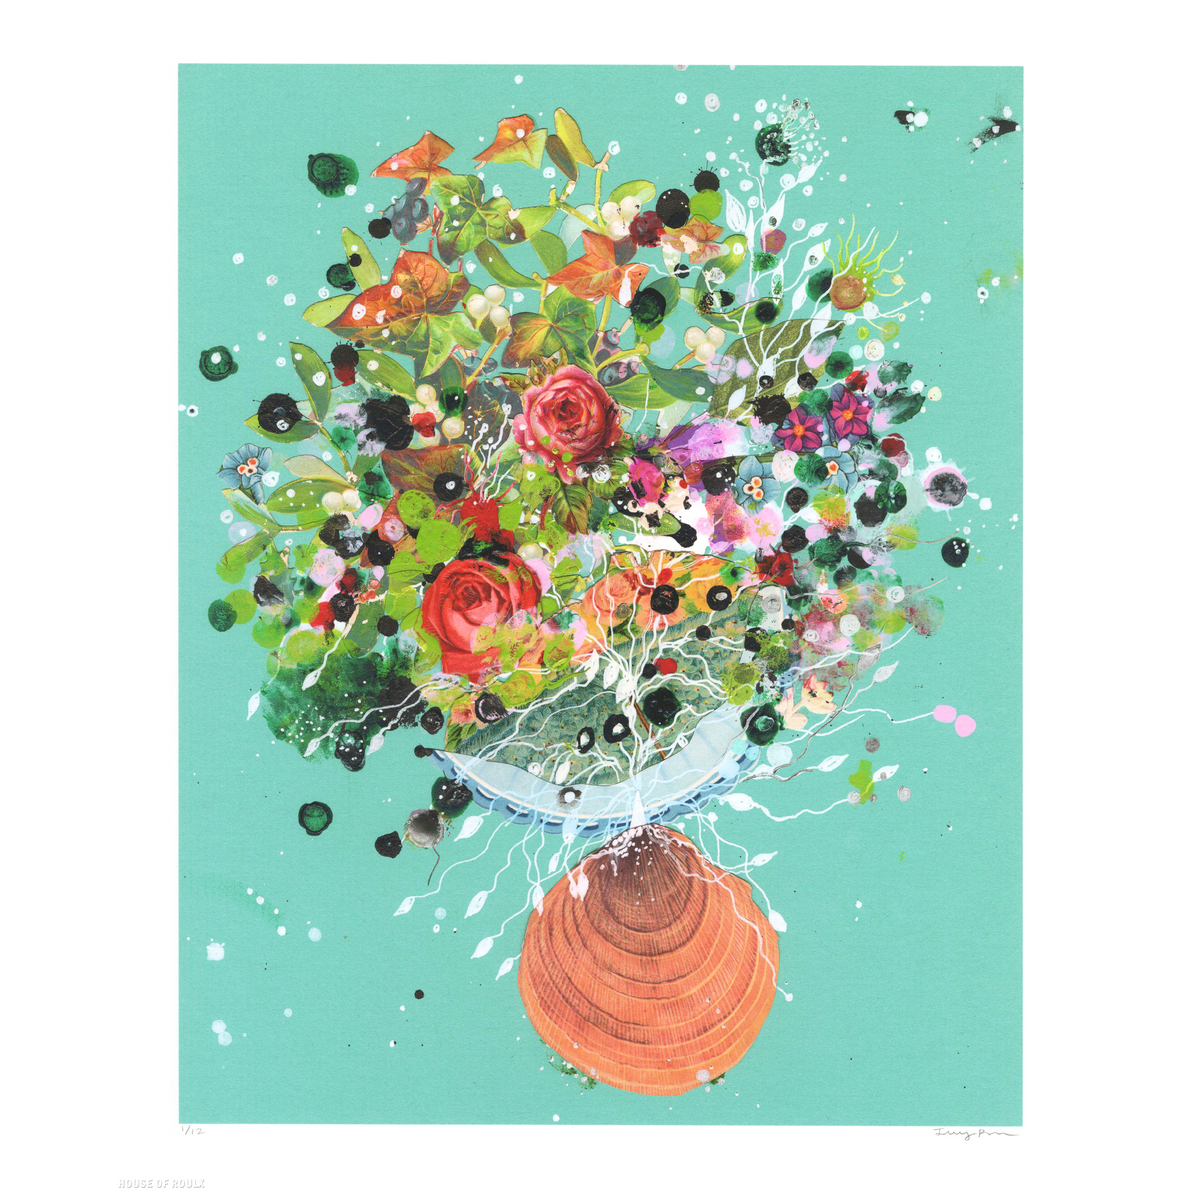 Jenny Brown &quot;Kaleidoscope Blossom&quot; - Archival Print, Limited Edition of 12 - 14 x 17&quot;